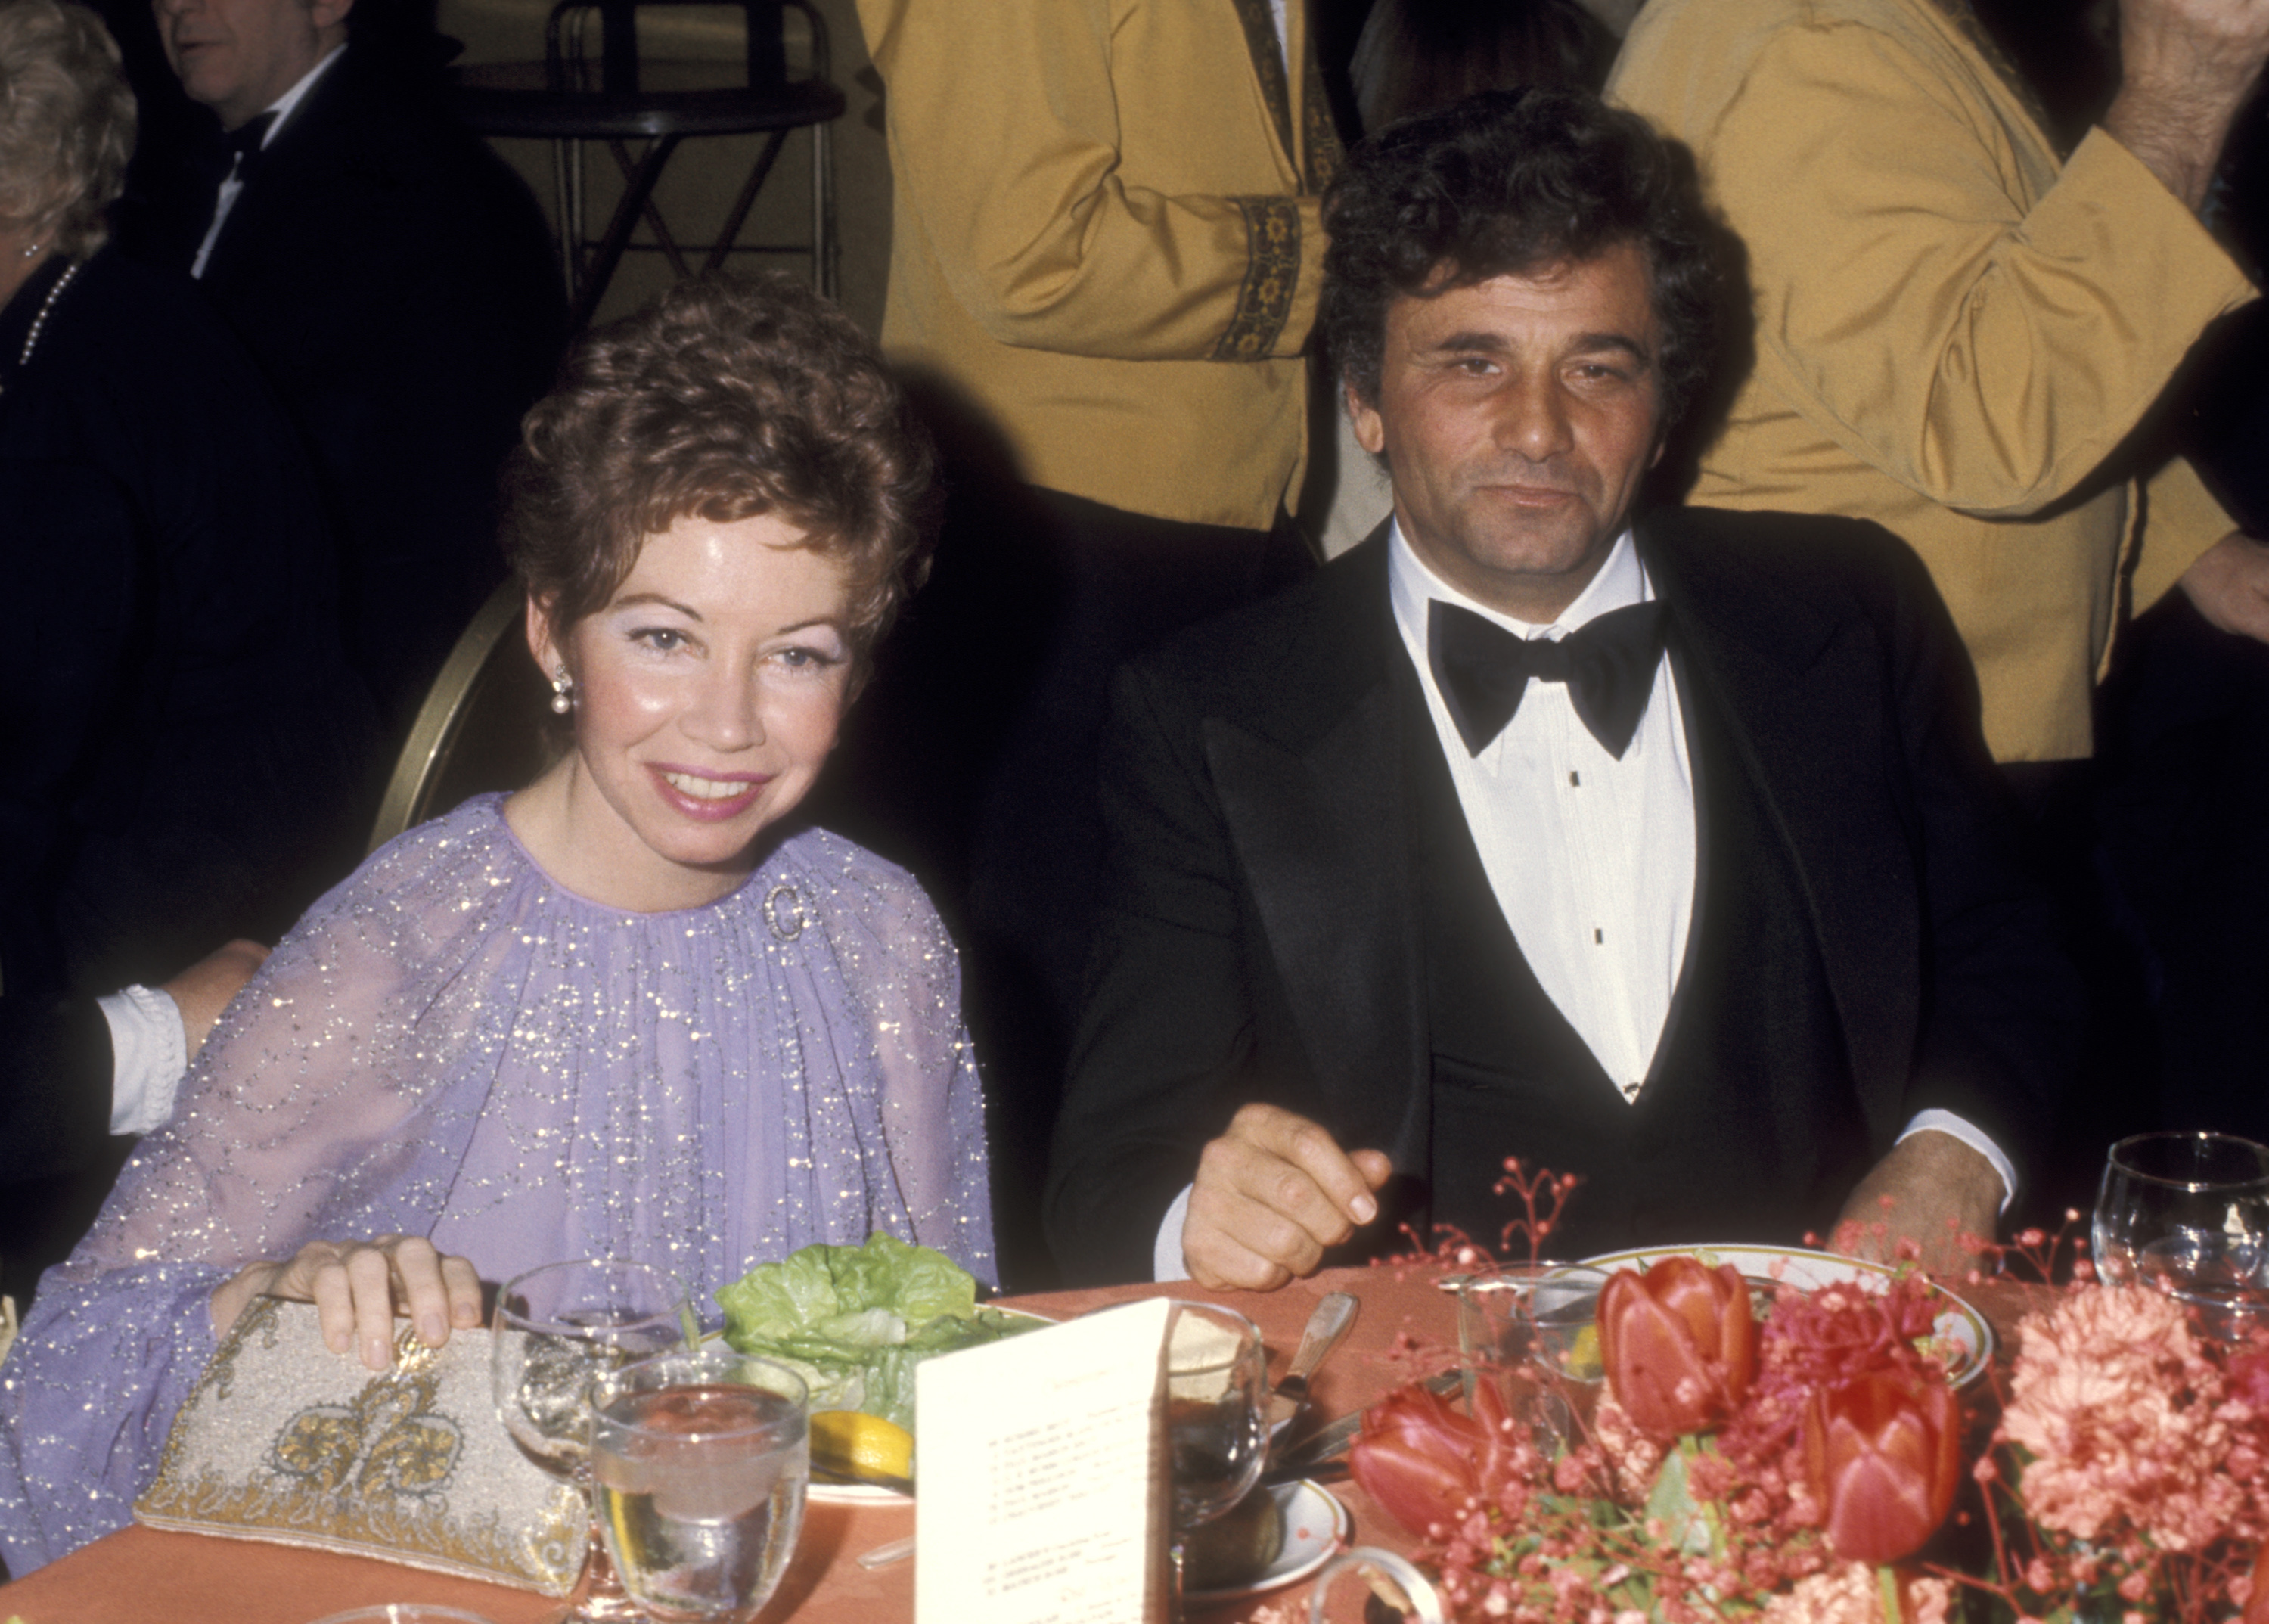 Peter Falk and Alice Mayo during the Third Annual American Film Institute Lifetime Achievement Awards Honoring Orson Welles on February 9, 1975, at the Century Plaza Hotel in Century City, California. | Source: Getty Images